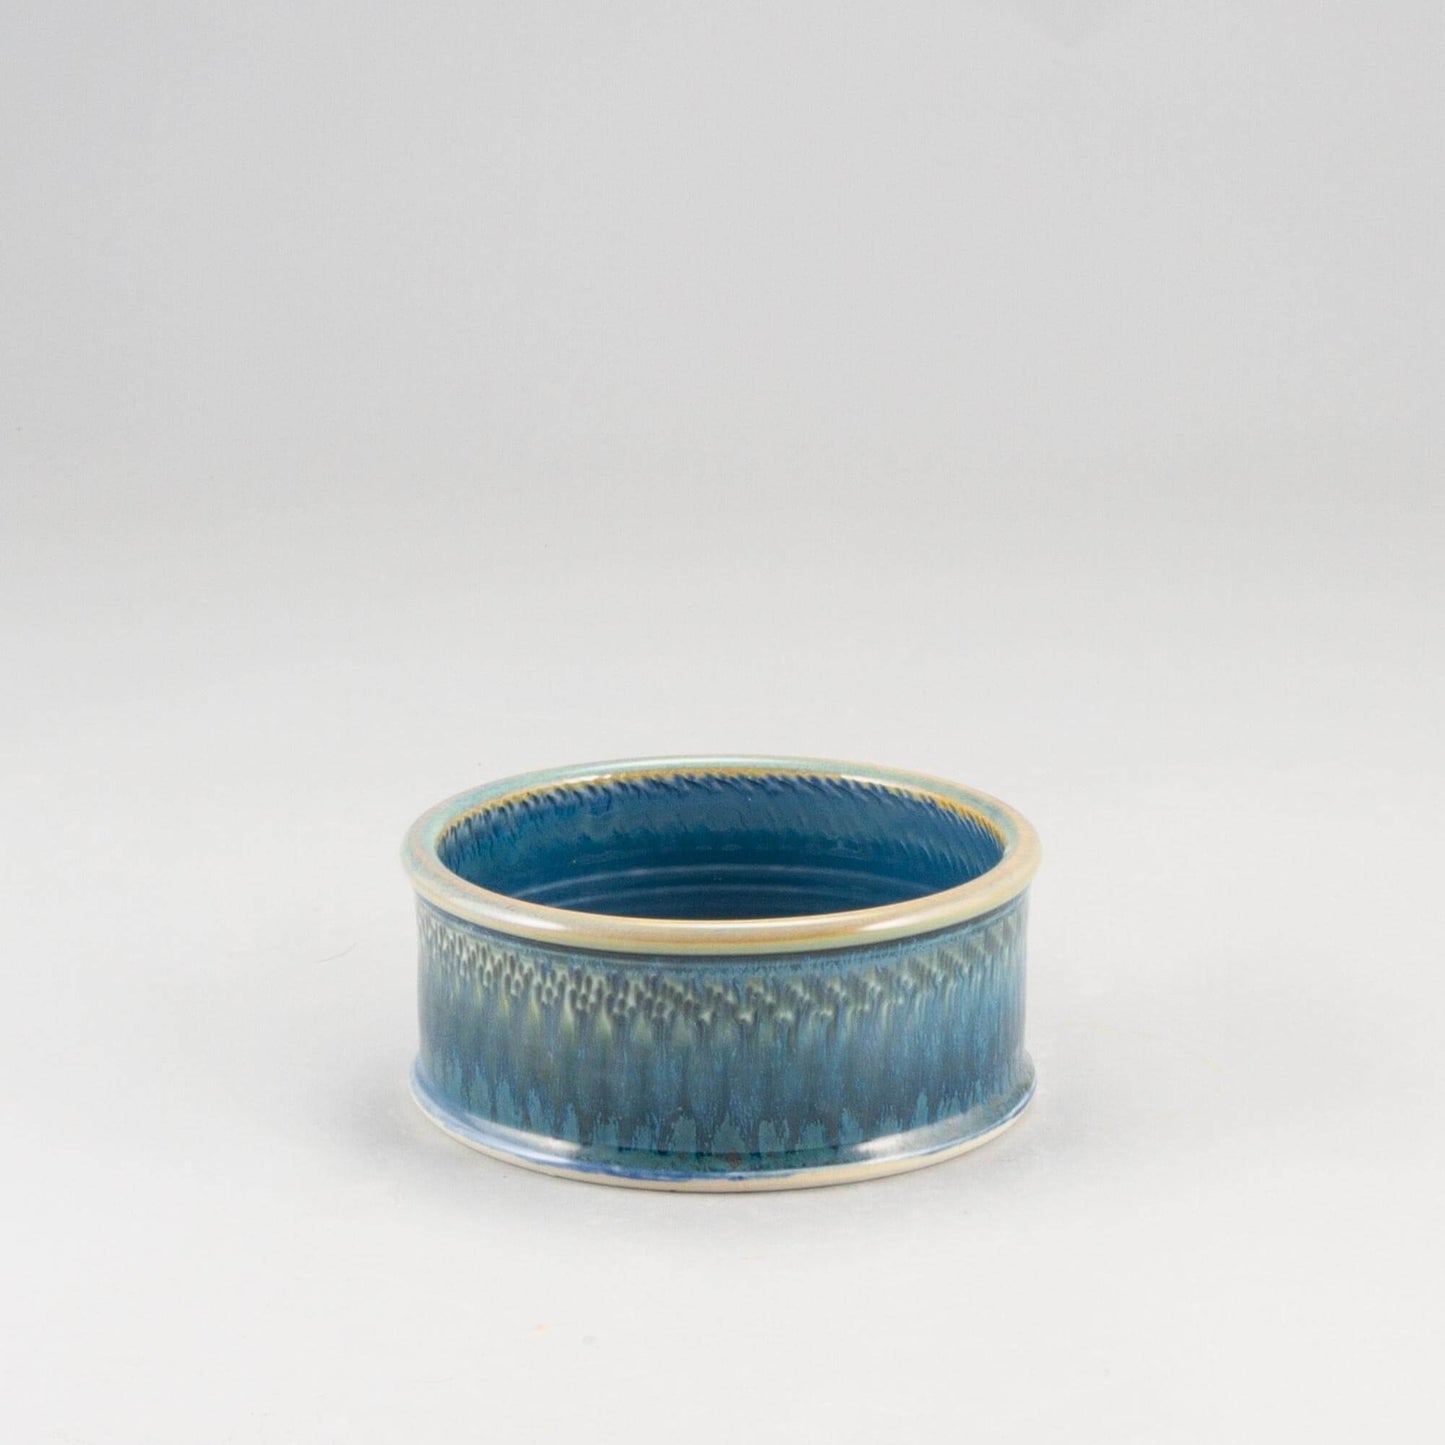 Handmade Pottery Brie Baker in Blue Oribe pattern made by Georgetown Pottery in Maine